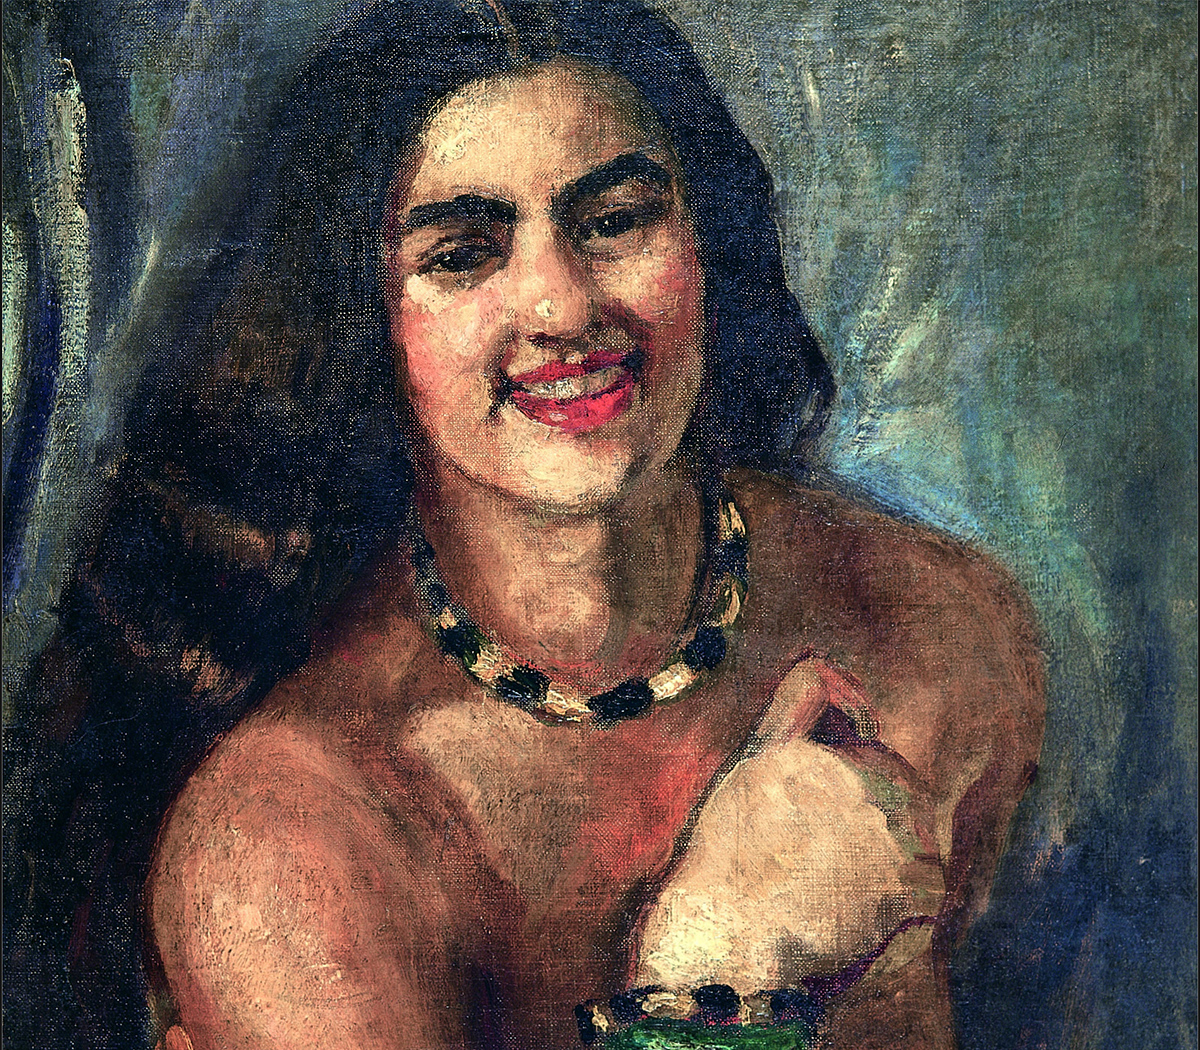 Is Amrita Sher-Gil Really the “Frida Kahlo of India”?